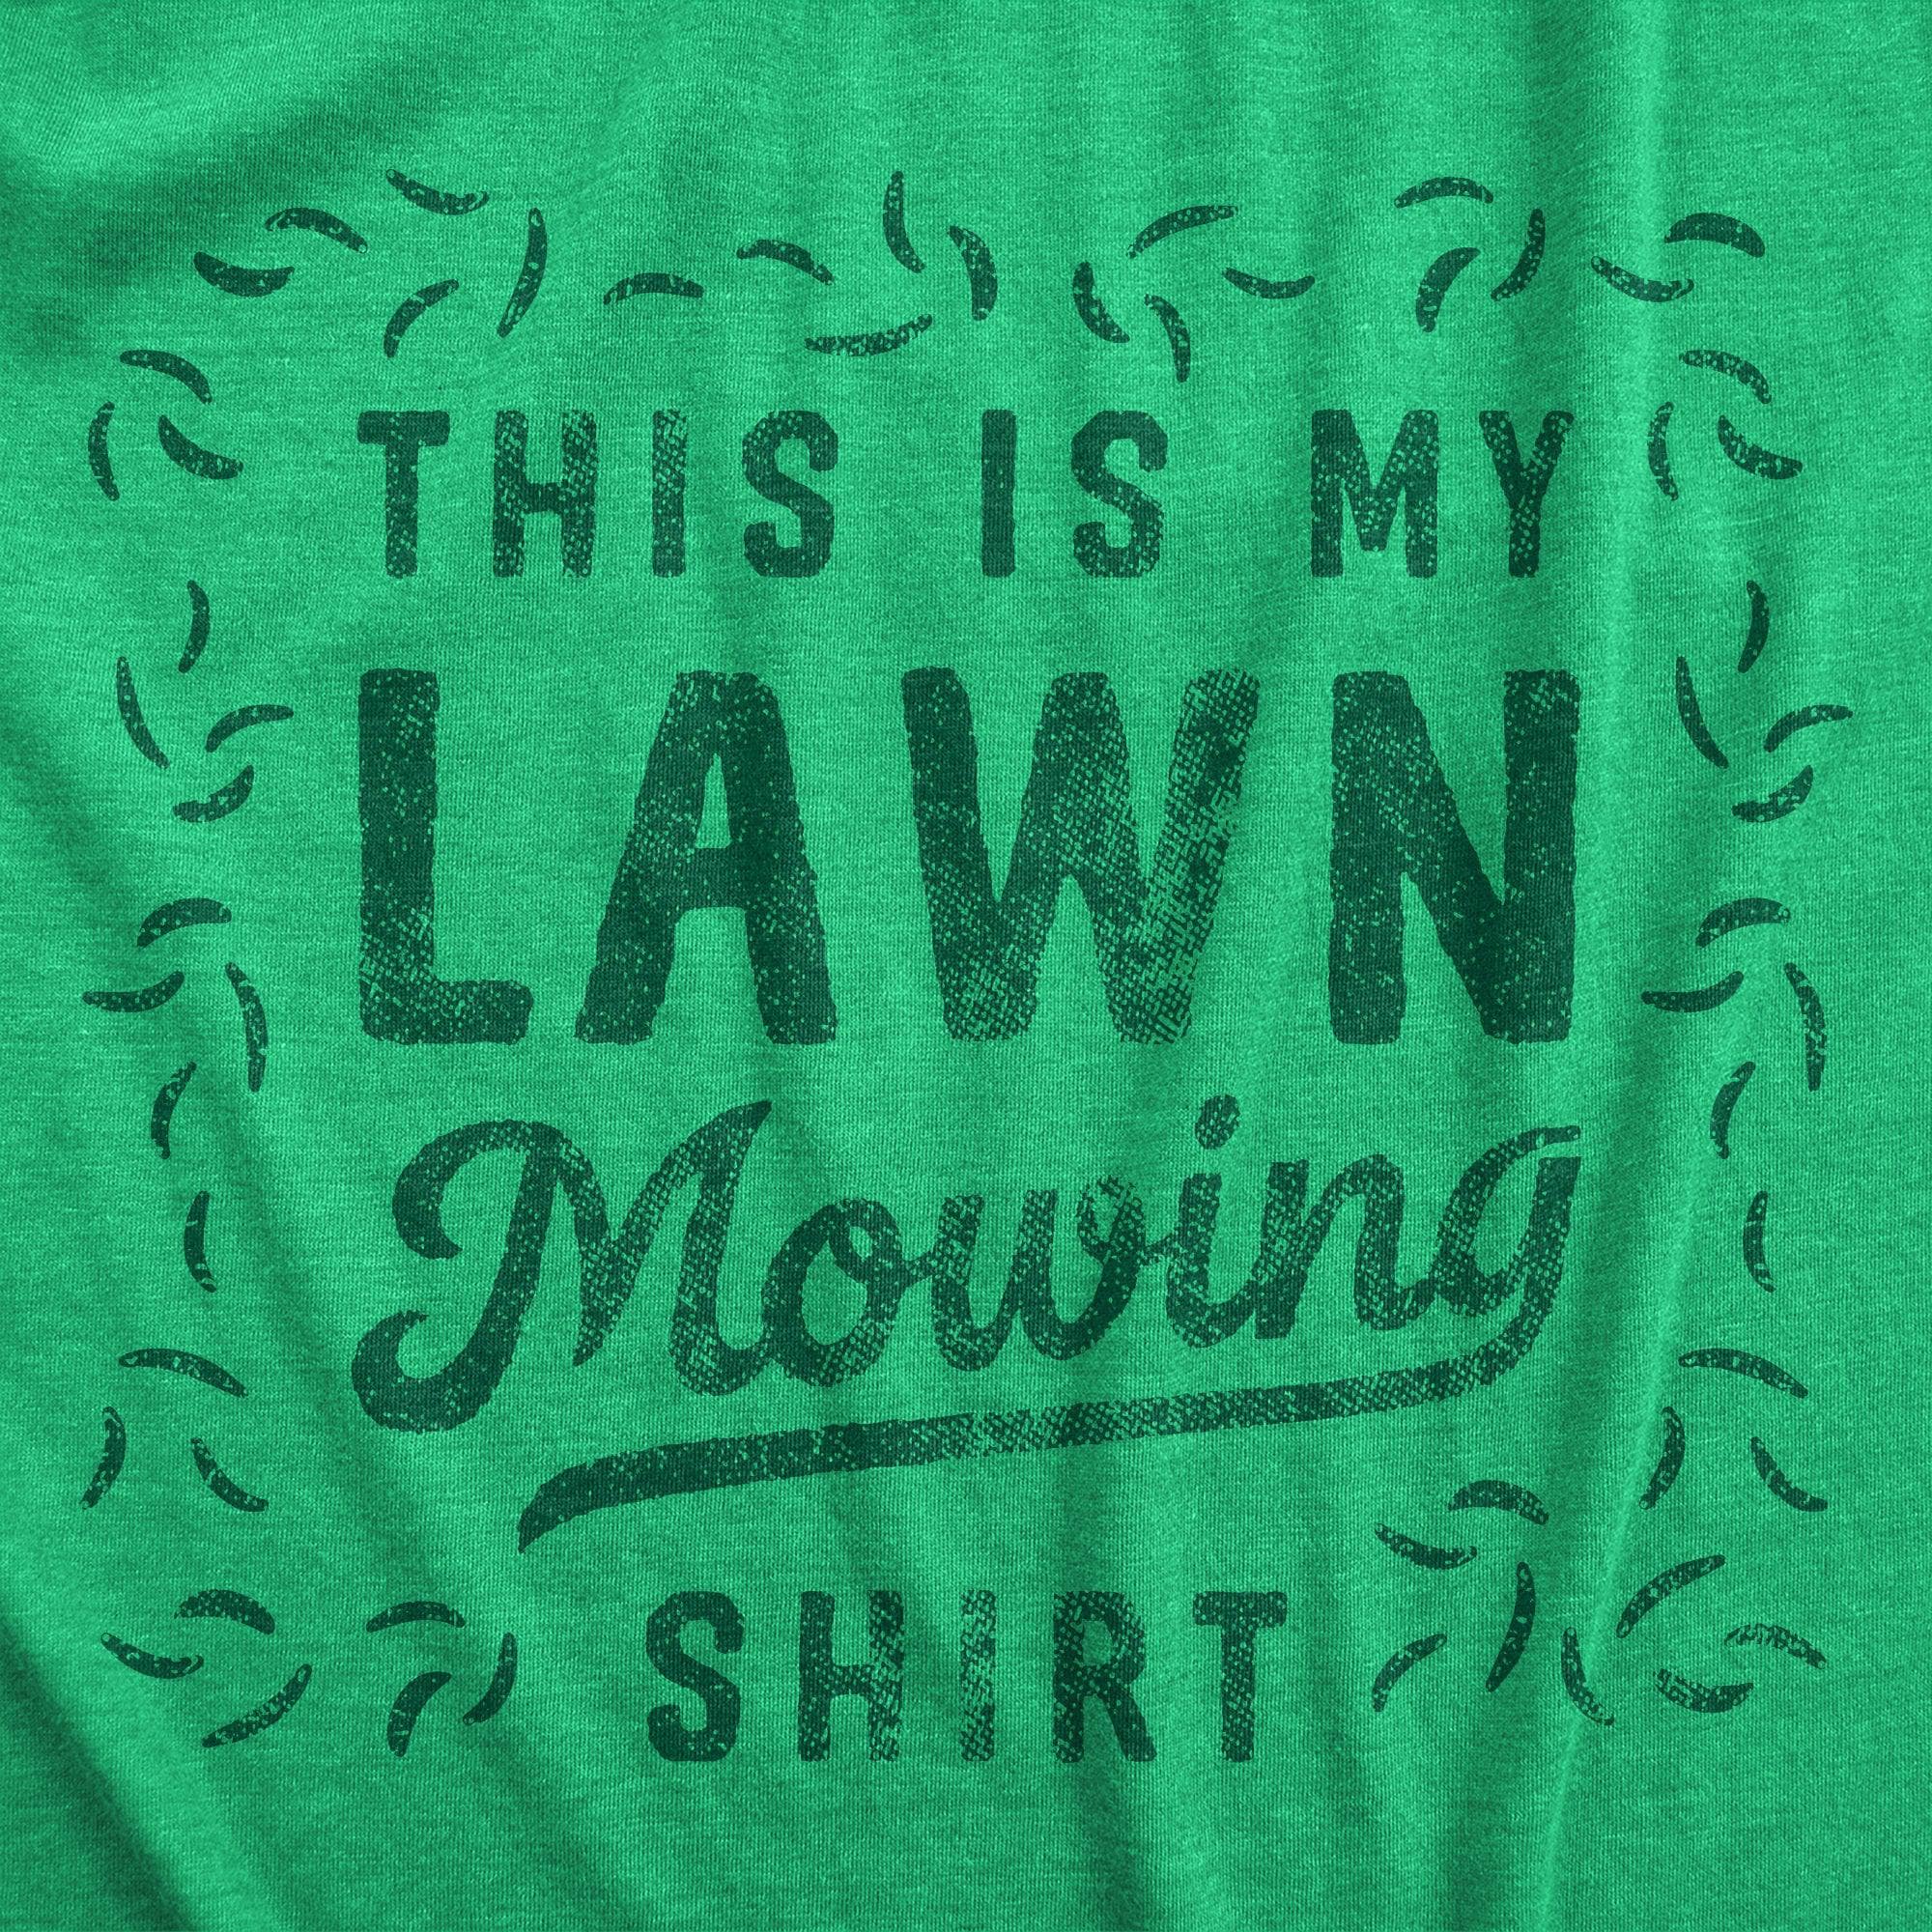 This Is My Lawn Mowing Shirt Men's Tshirt  -  Crazy Dog T-Shirts